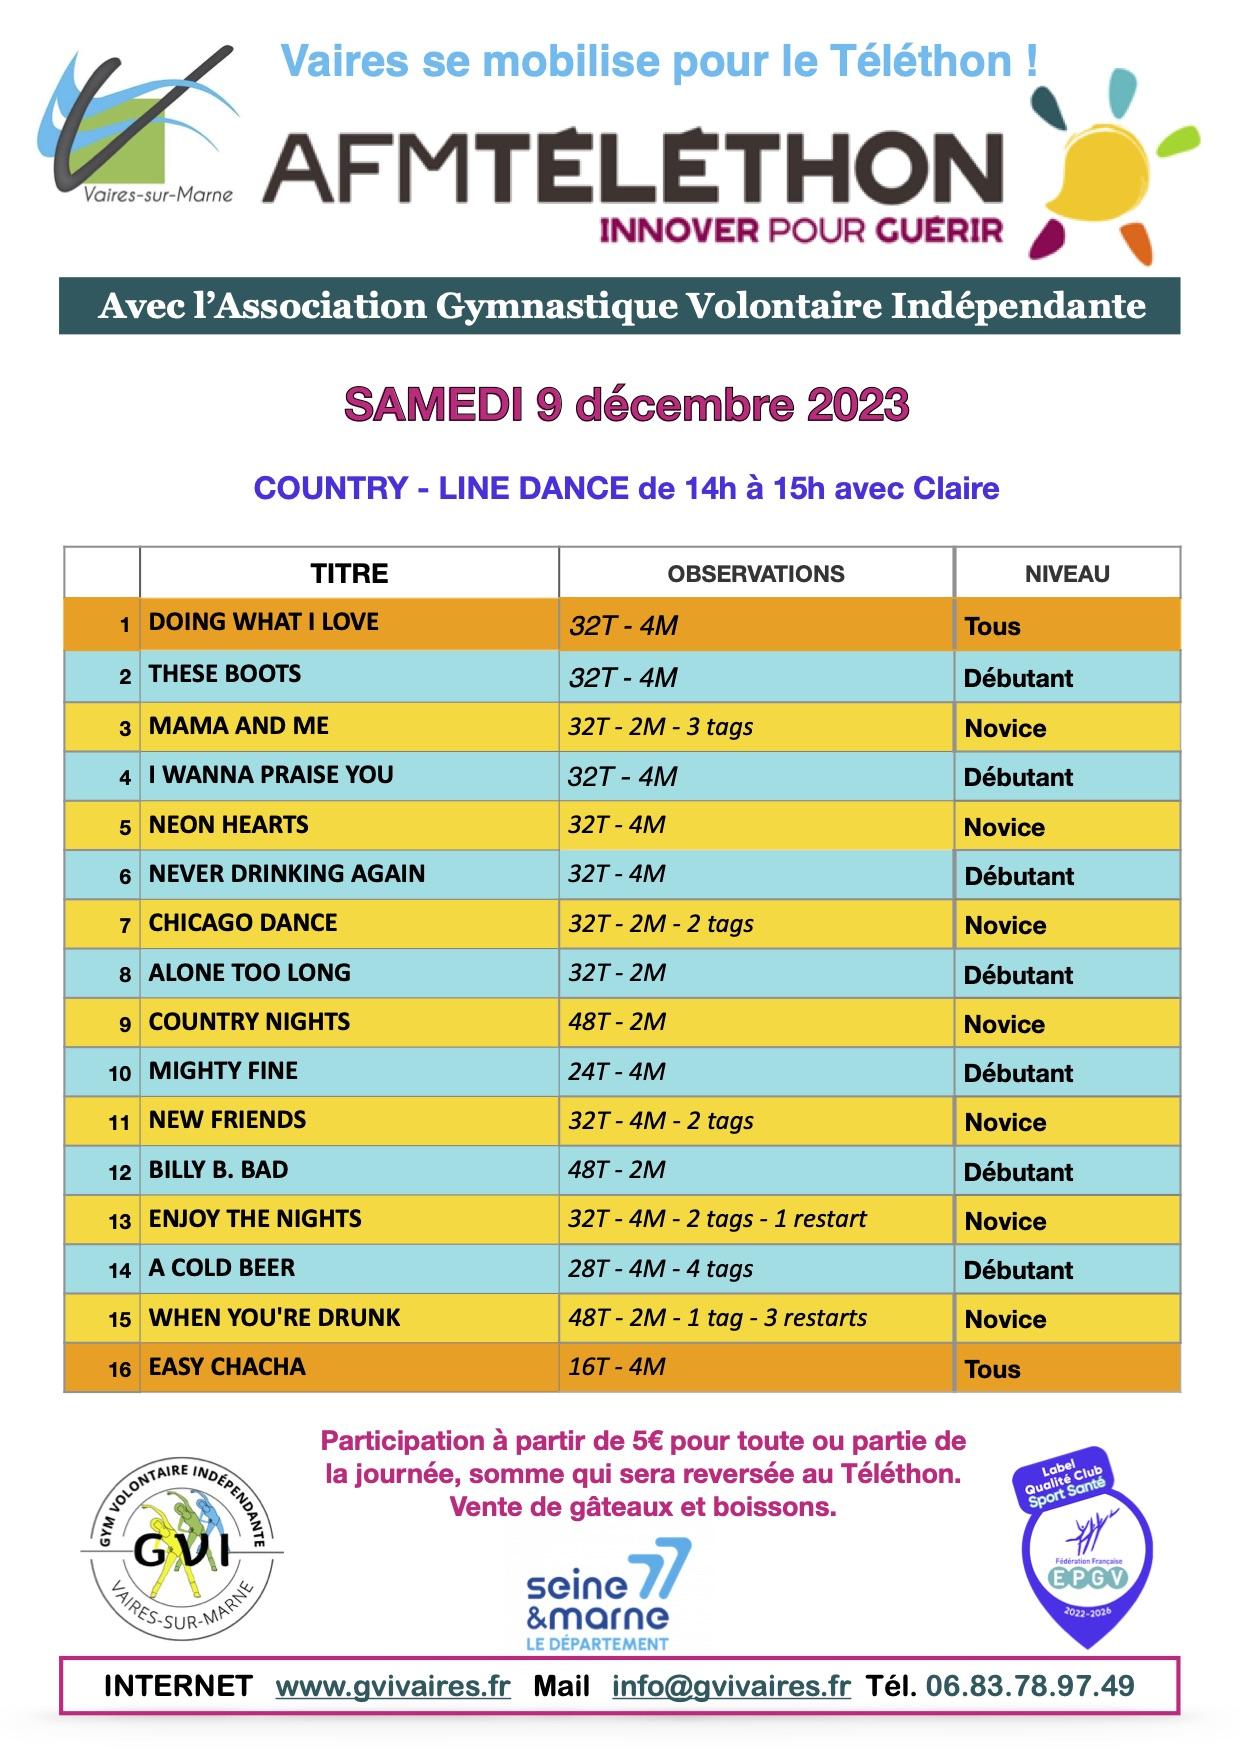 Liste country telethon 2023claire